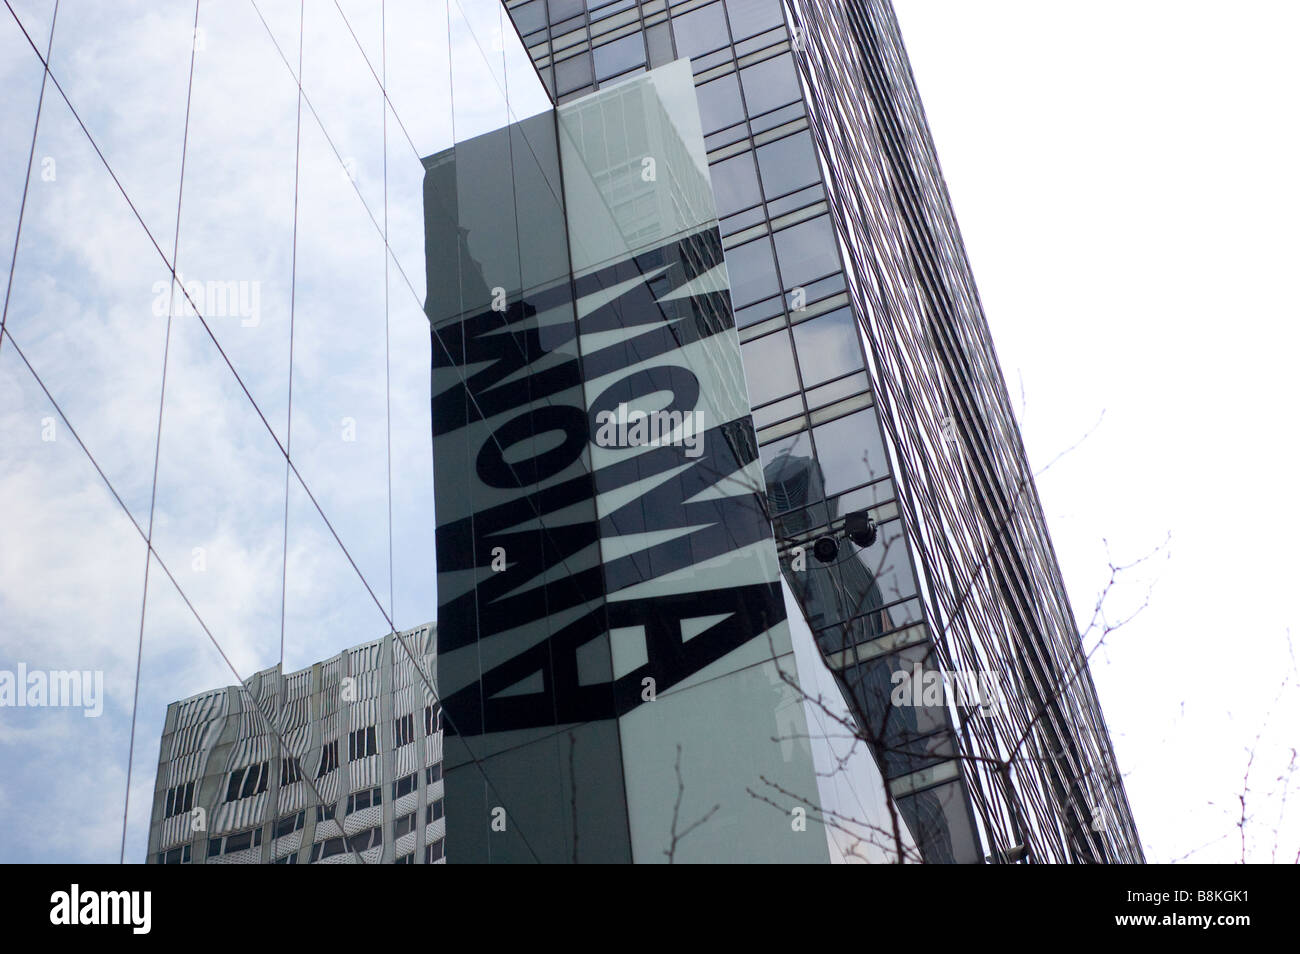 Low Angle View of Museum of Modern Art (MOMA) Building in New York City, USA (For Editorial Use Only) Stock Photo